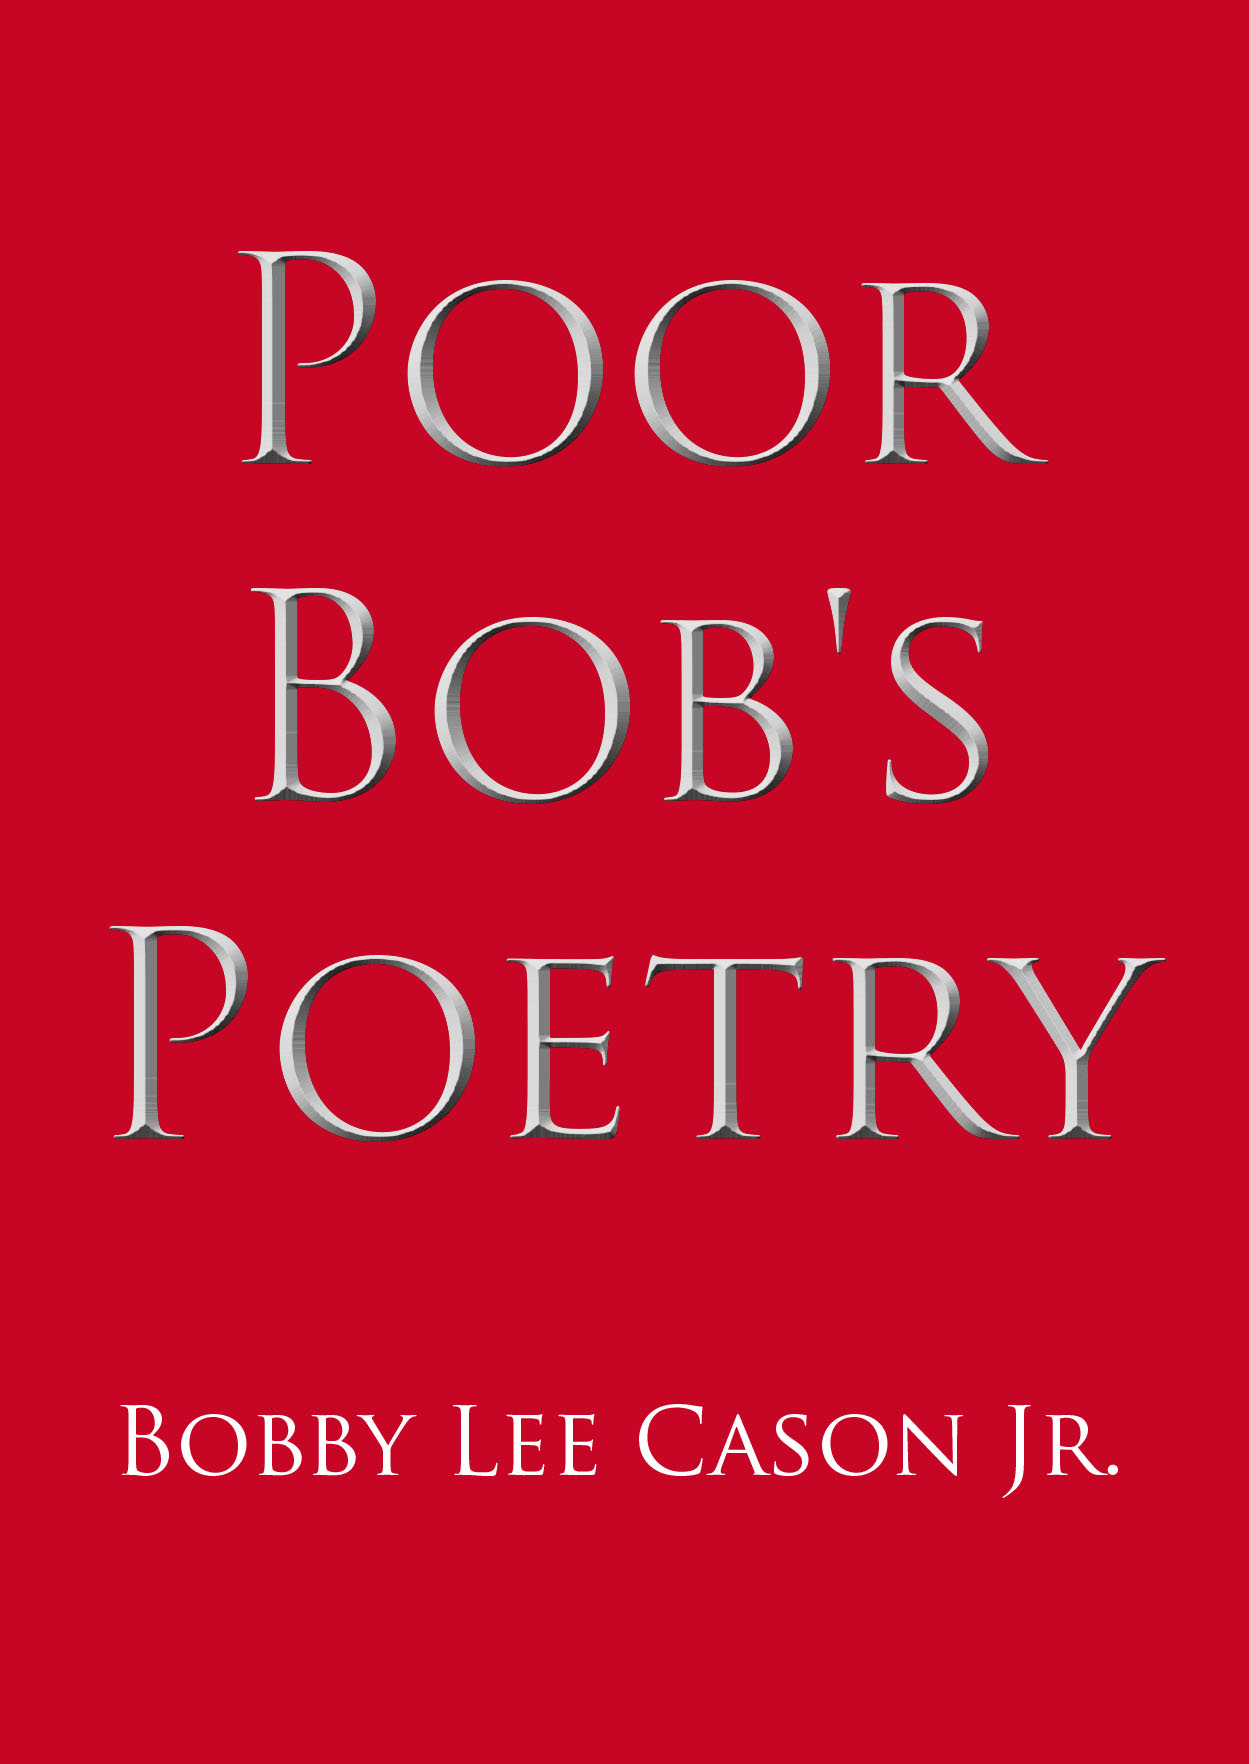 Bobby Lee Cason Jr.’s New Book, "Poor Bob's Poetry," is a Hopeful and Uplifting Collection of Poems That Serve as a Retrospective of the Author’s Storied Life